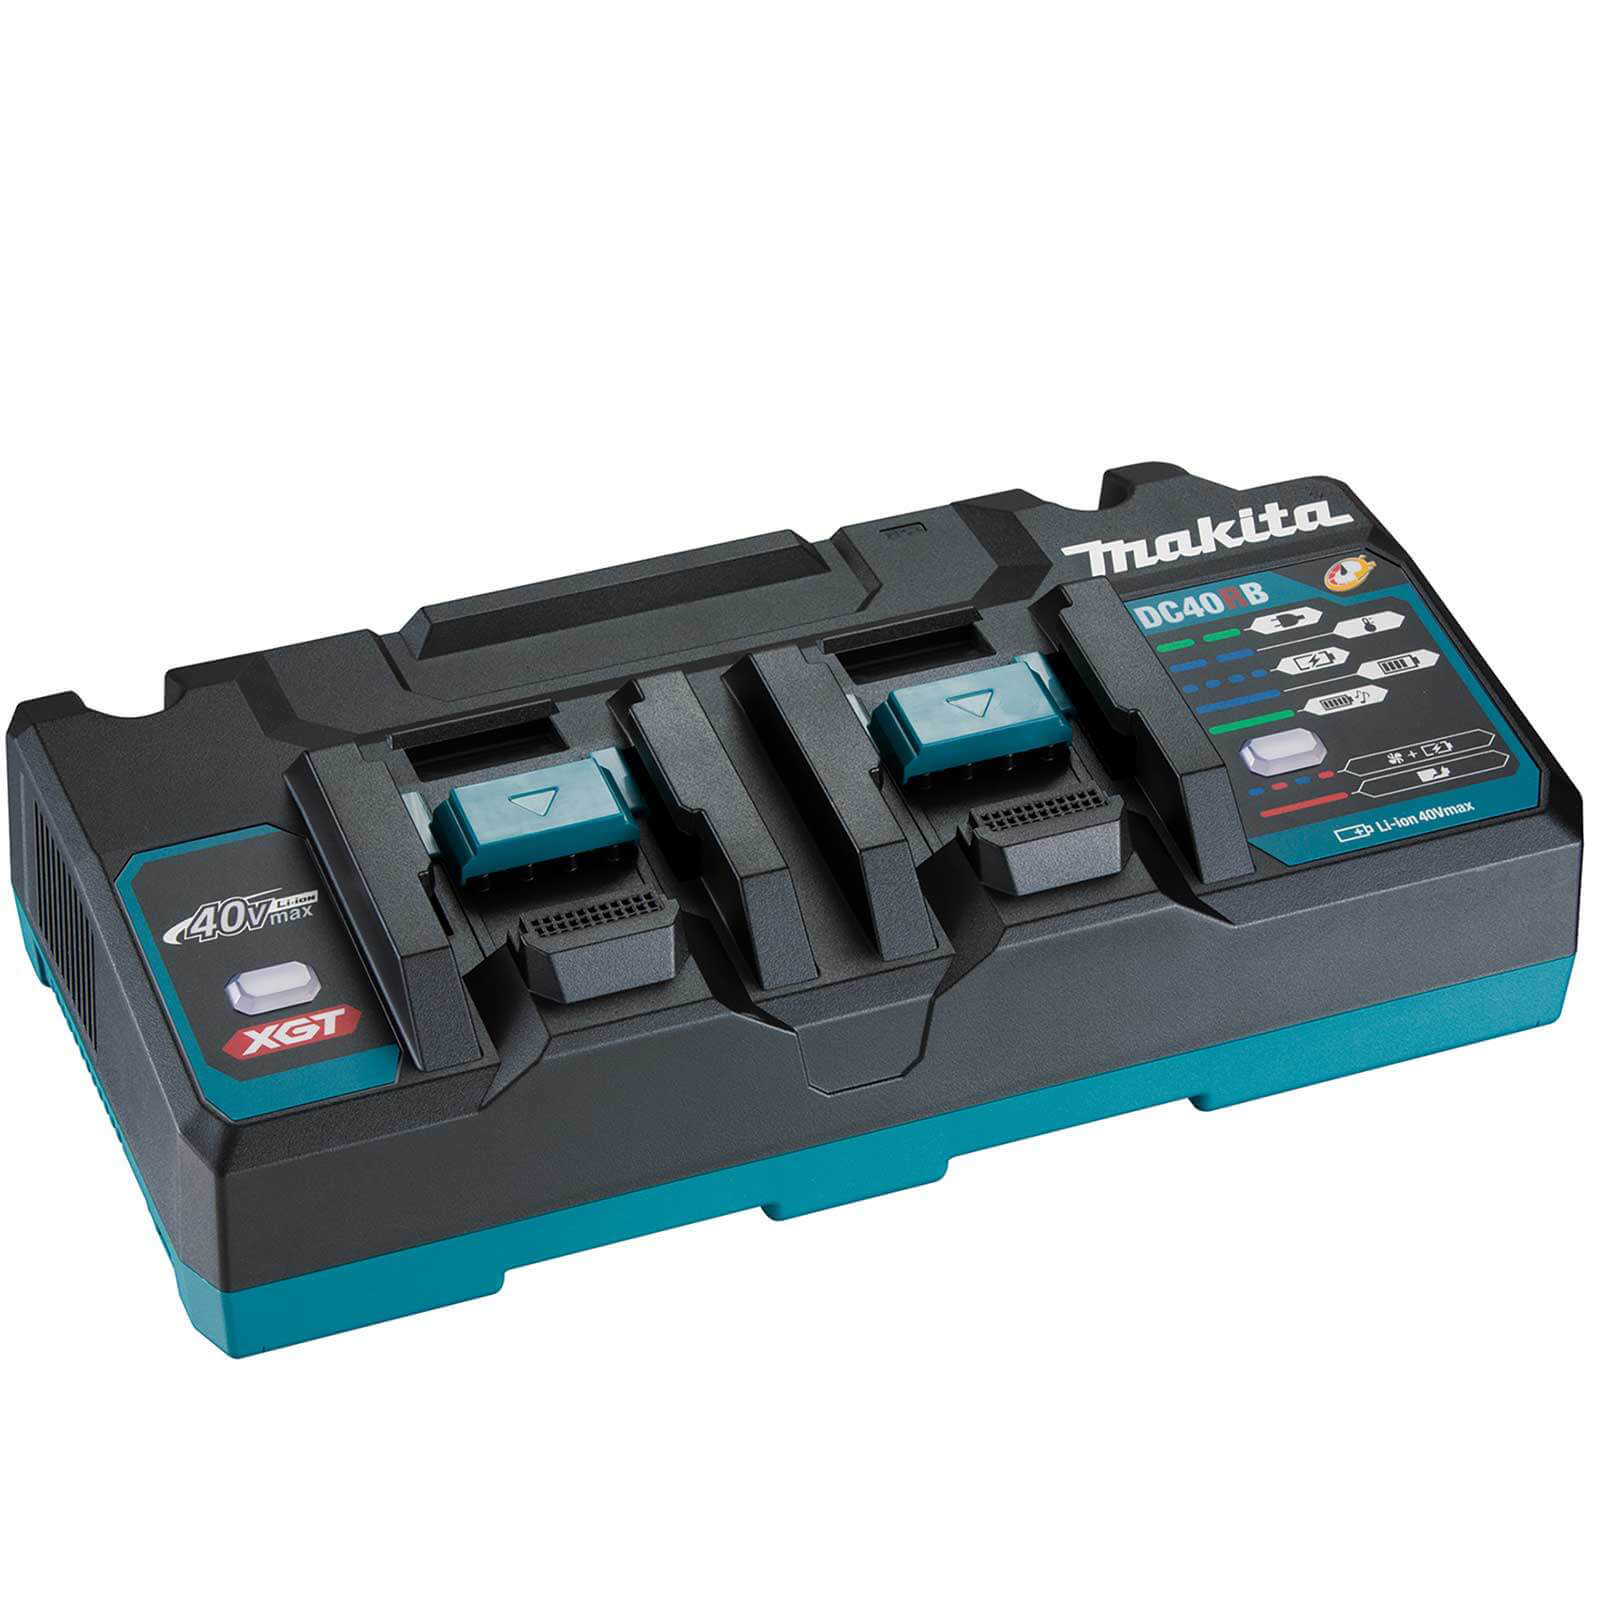 Photos - Power Tool Battery Makita DC40RB 40v Max XGT Twin Port Battery Fast Charger 110v 191N07-2 